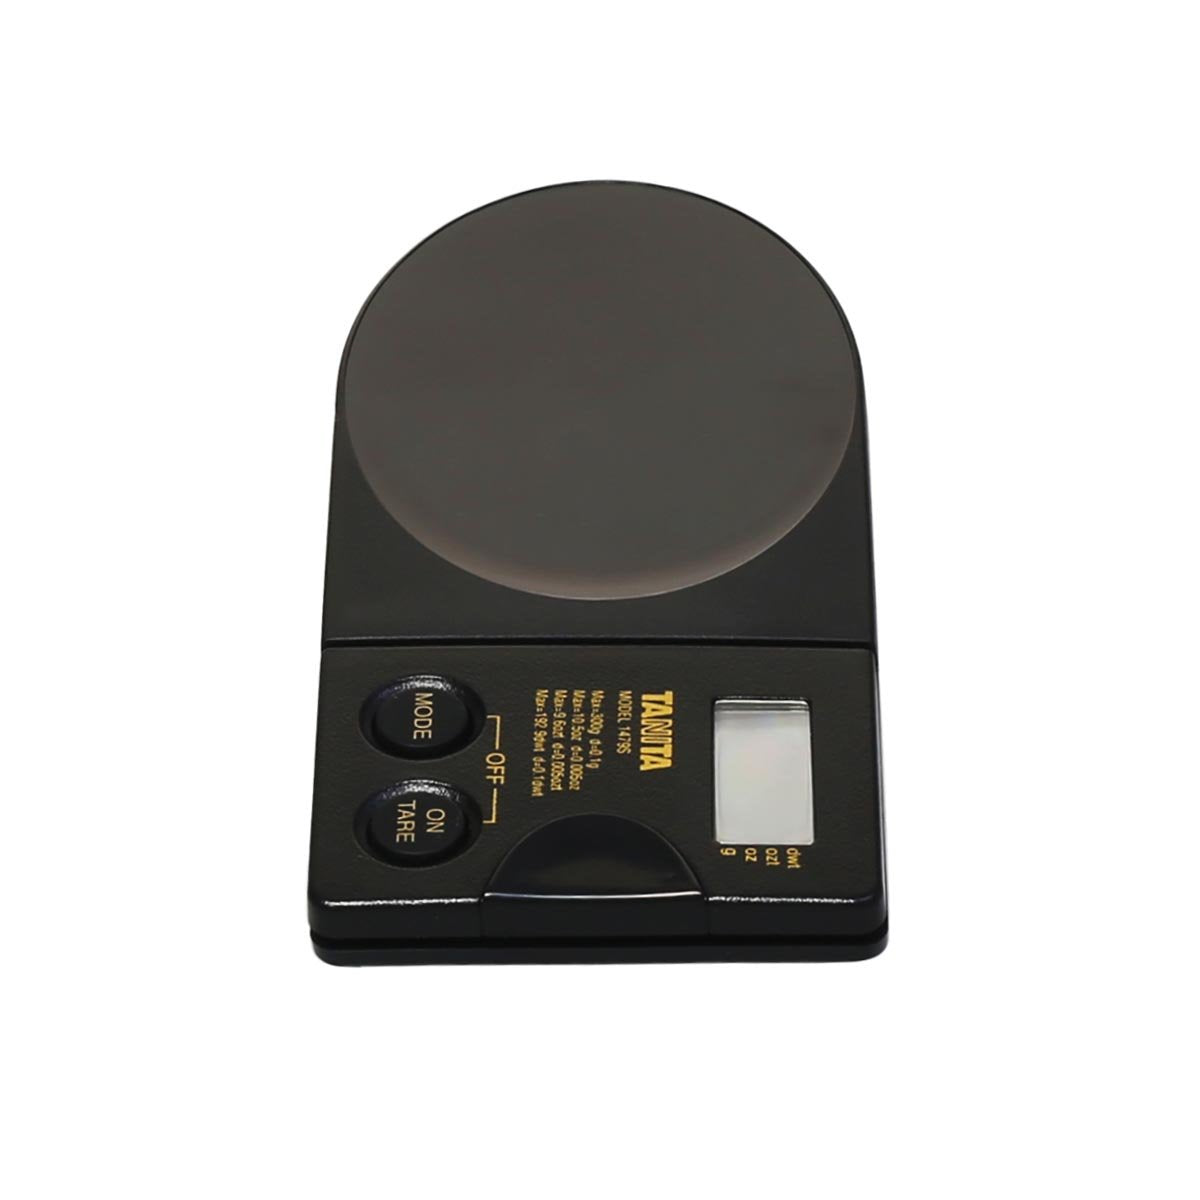 TANITA GOLD SCALE 400X.1G, Gold Weighing Scale, Jewellery Scales